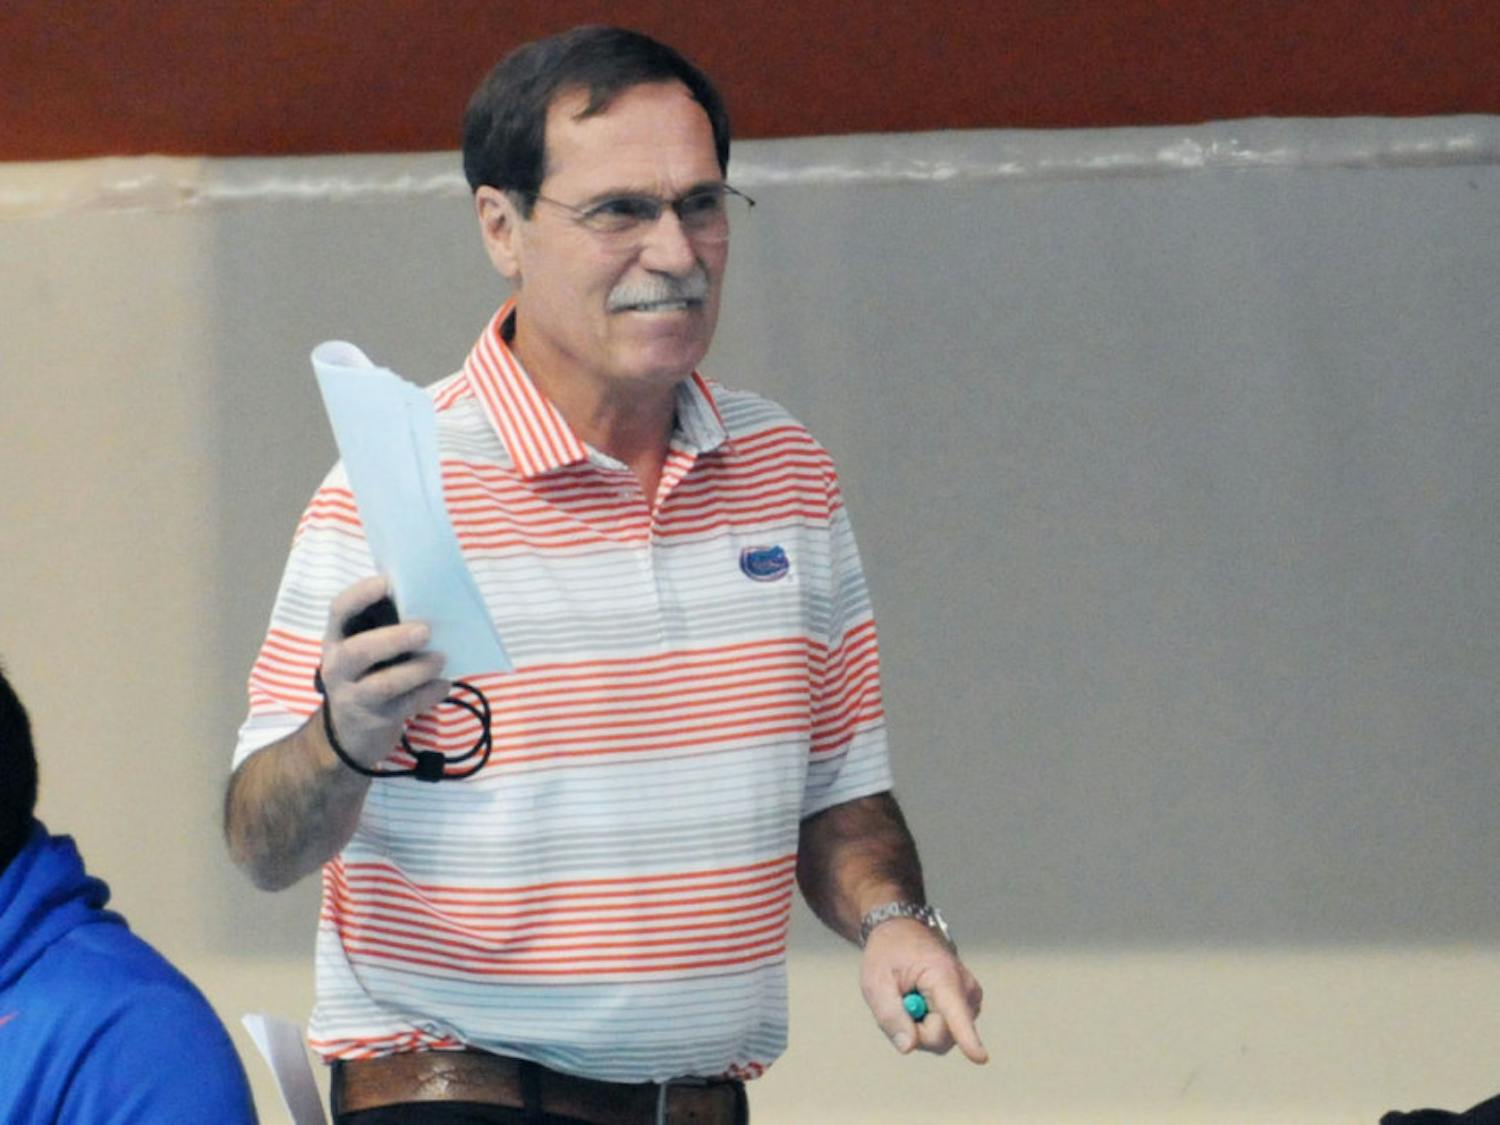 Gregg Troy retired from being head coach of UF Swimming and Diving after spending 20 years in the position. “I’ve experienced countless memorable moments here at Florida," Troy said. 